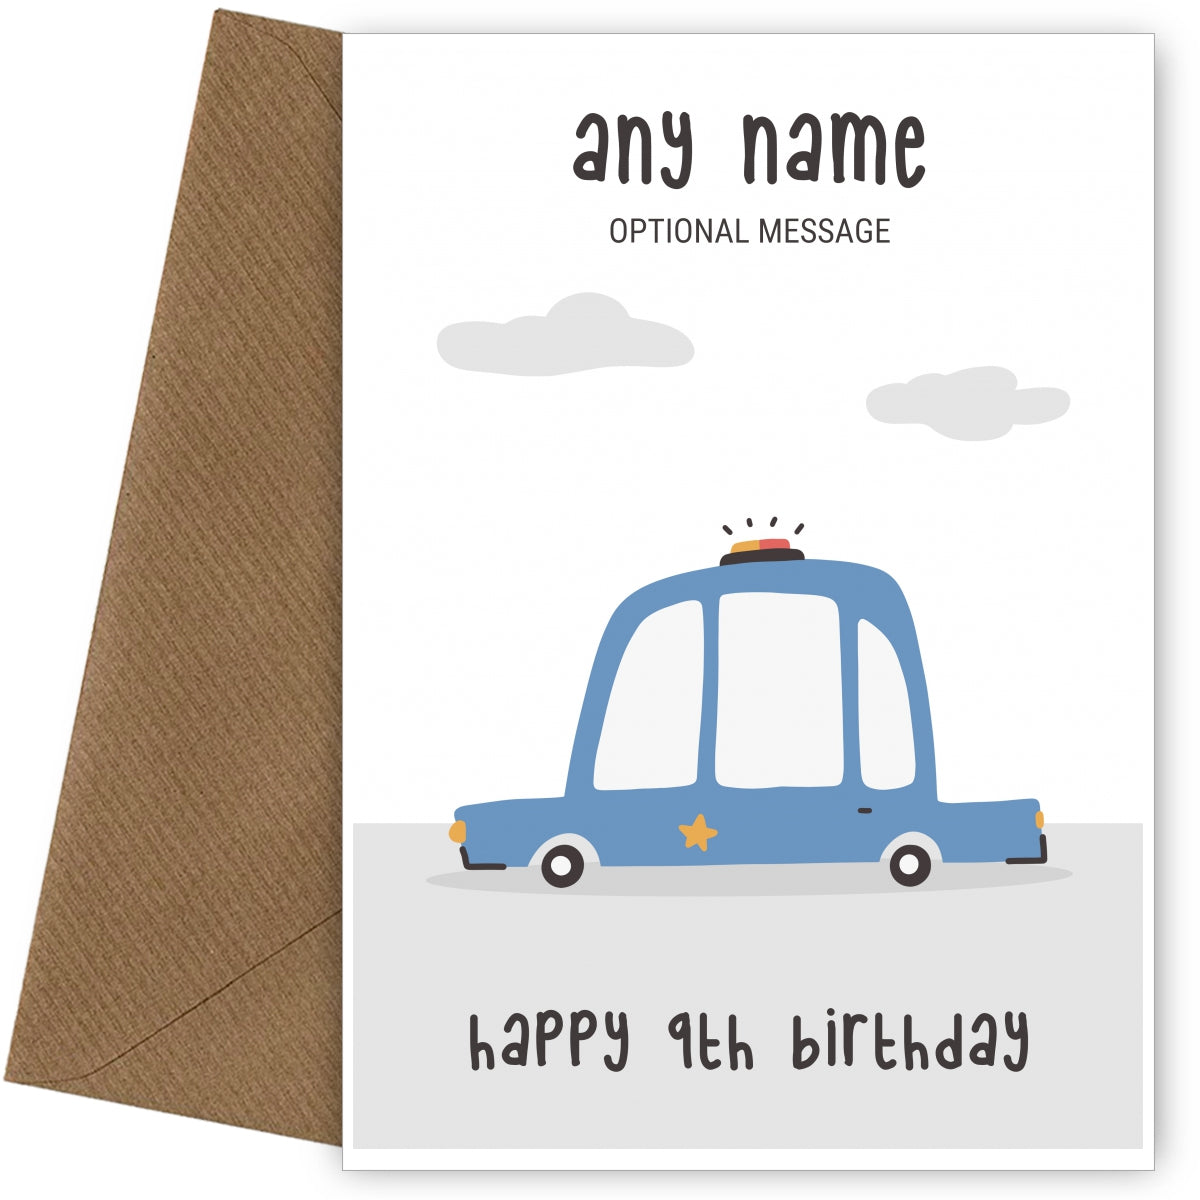 Fun Vehicles 9th Birthday Card for Any Name - Police Car